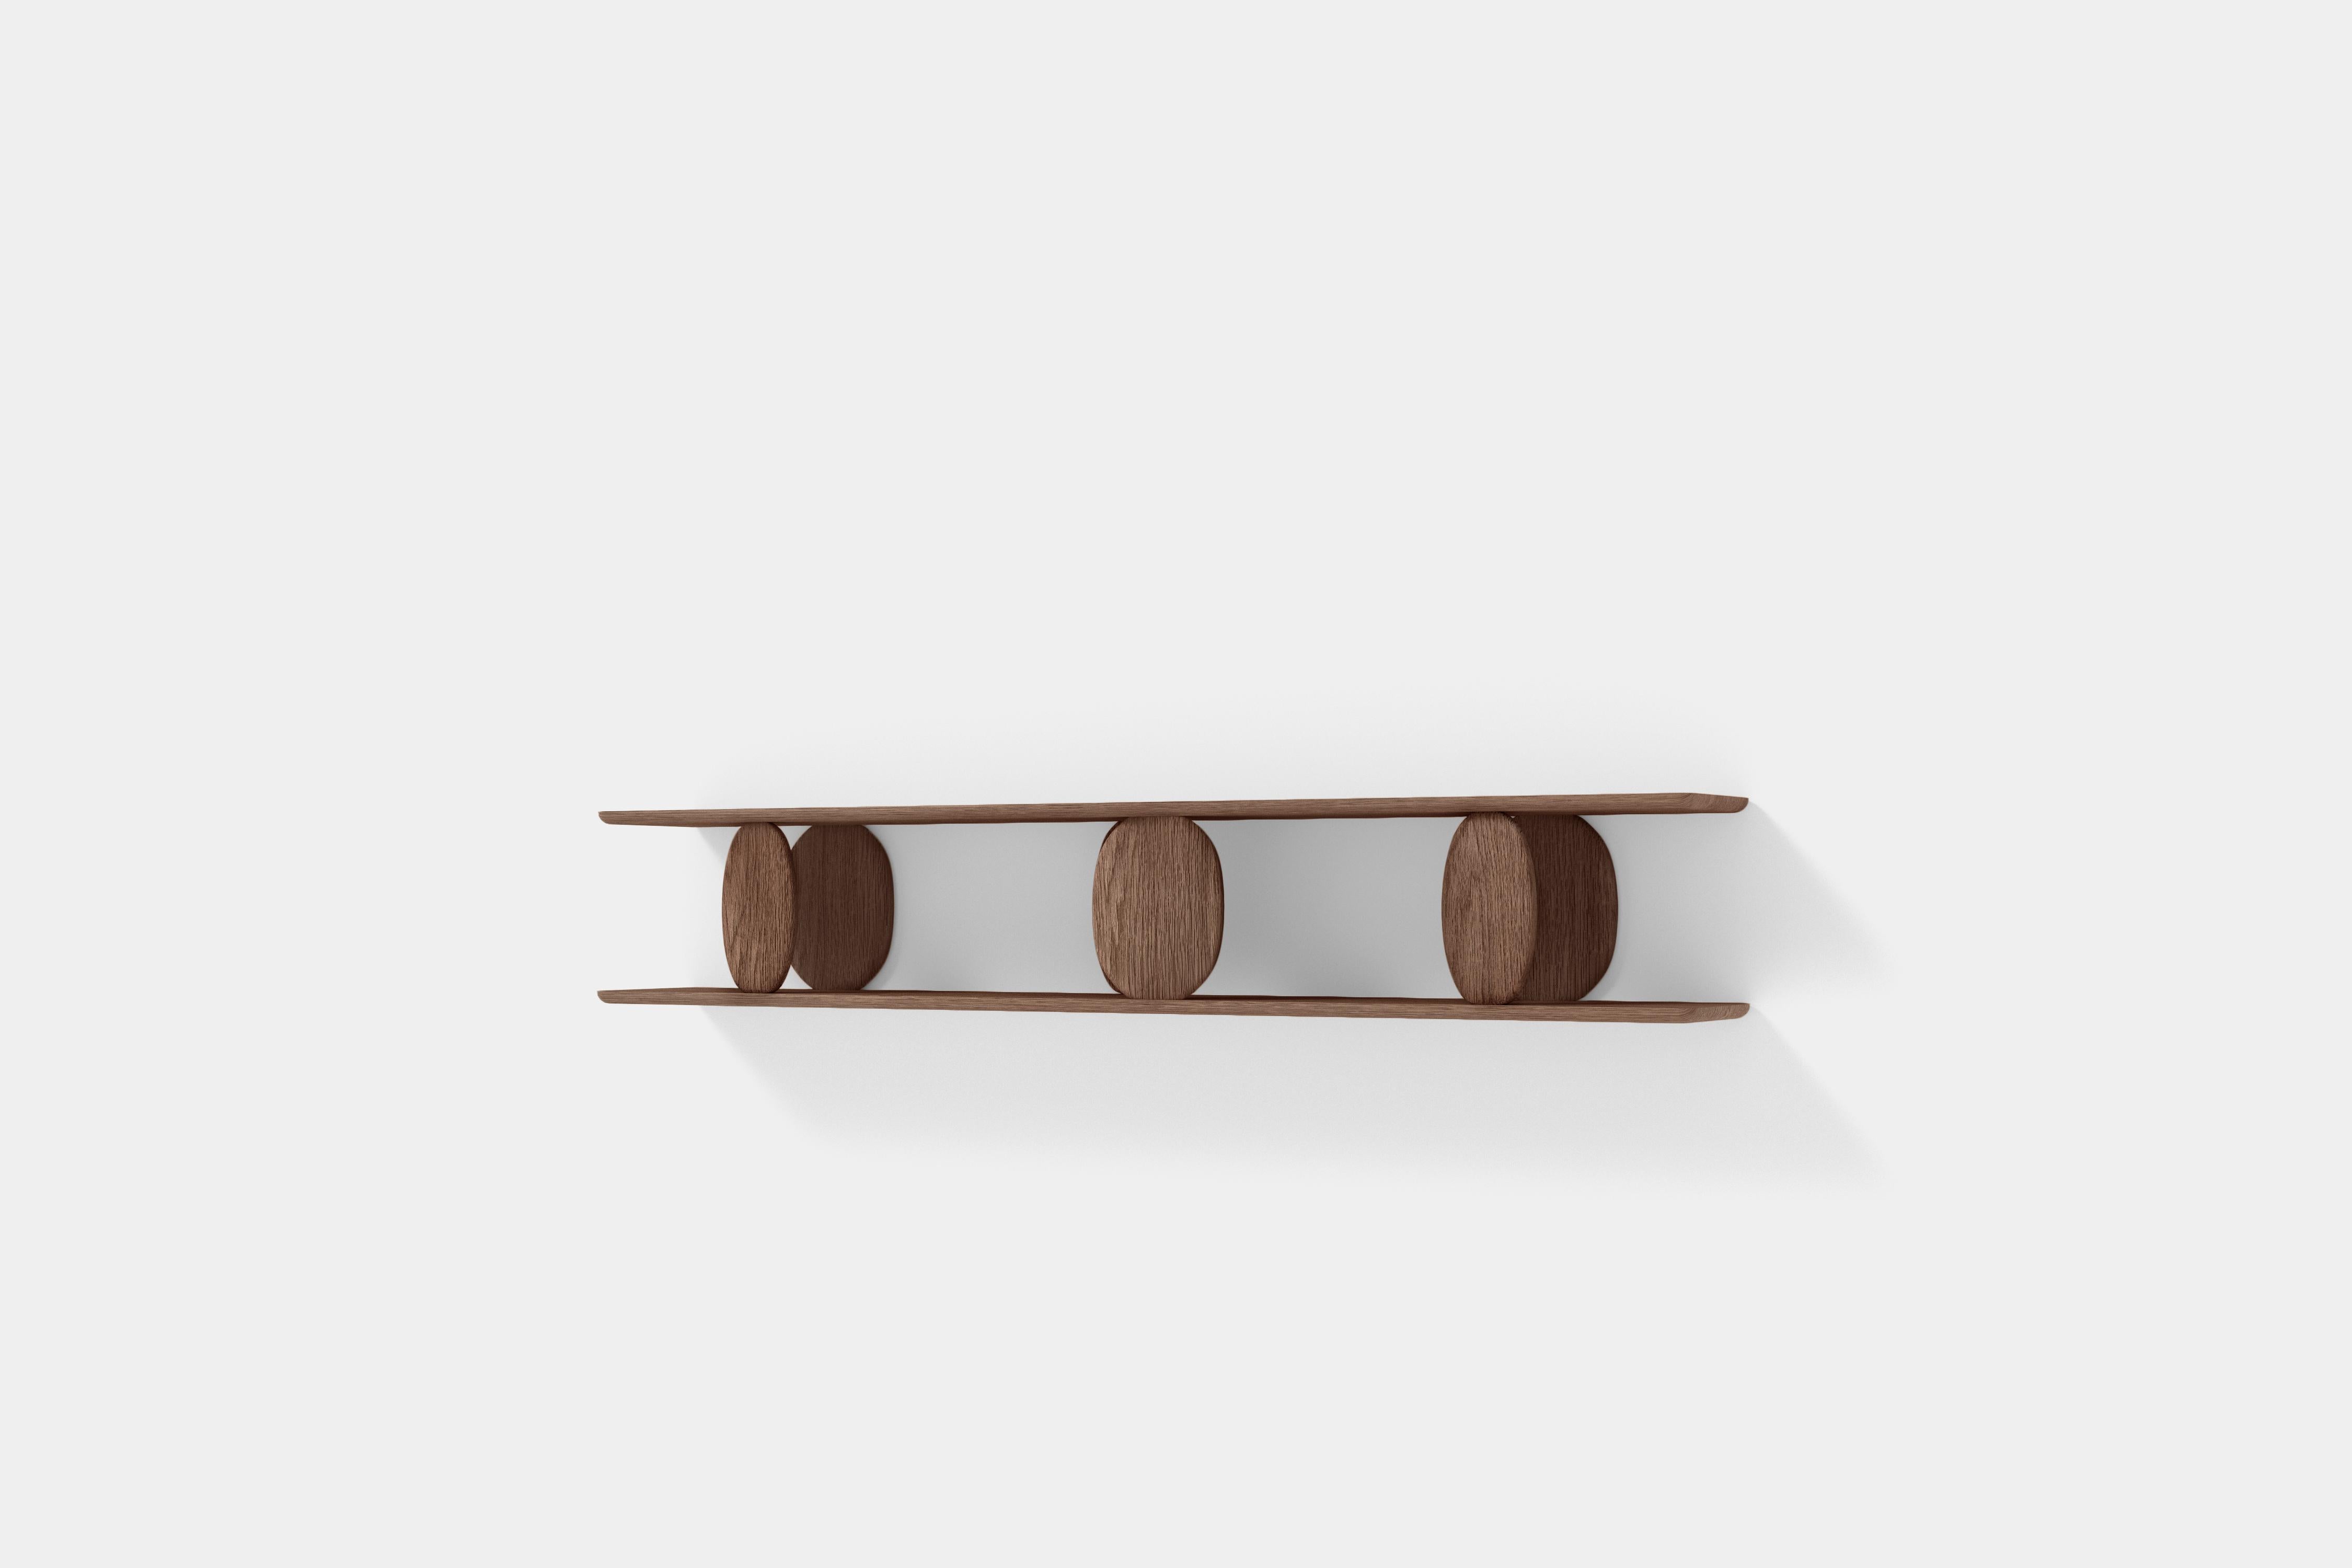 Noviembre XVIII Large Wall Shelf in Wood, Floating Shelf by Joel Escalona

The Noviembre collection is inspired by the creative values of Constantin Brancusi, a Romanian sculptor considered one of the most influential artists of the twentieth